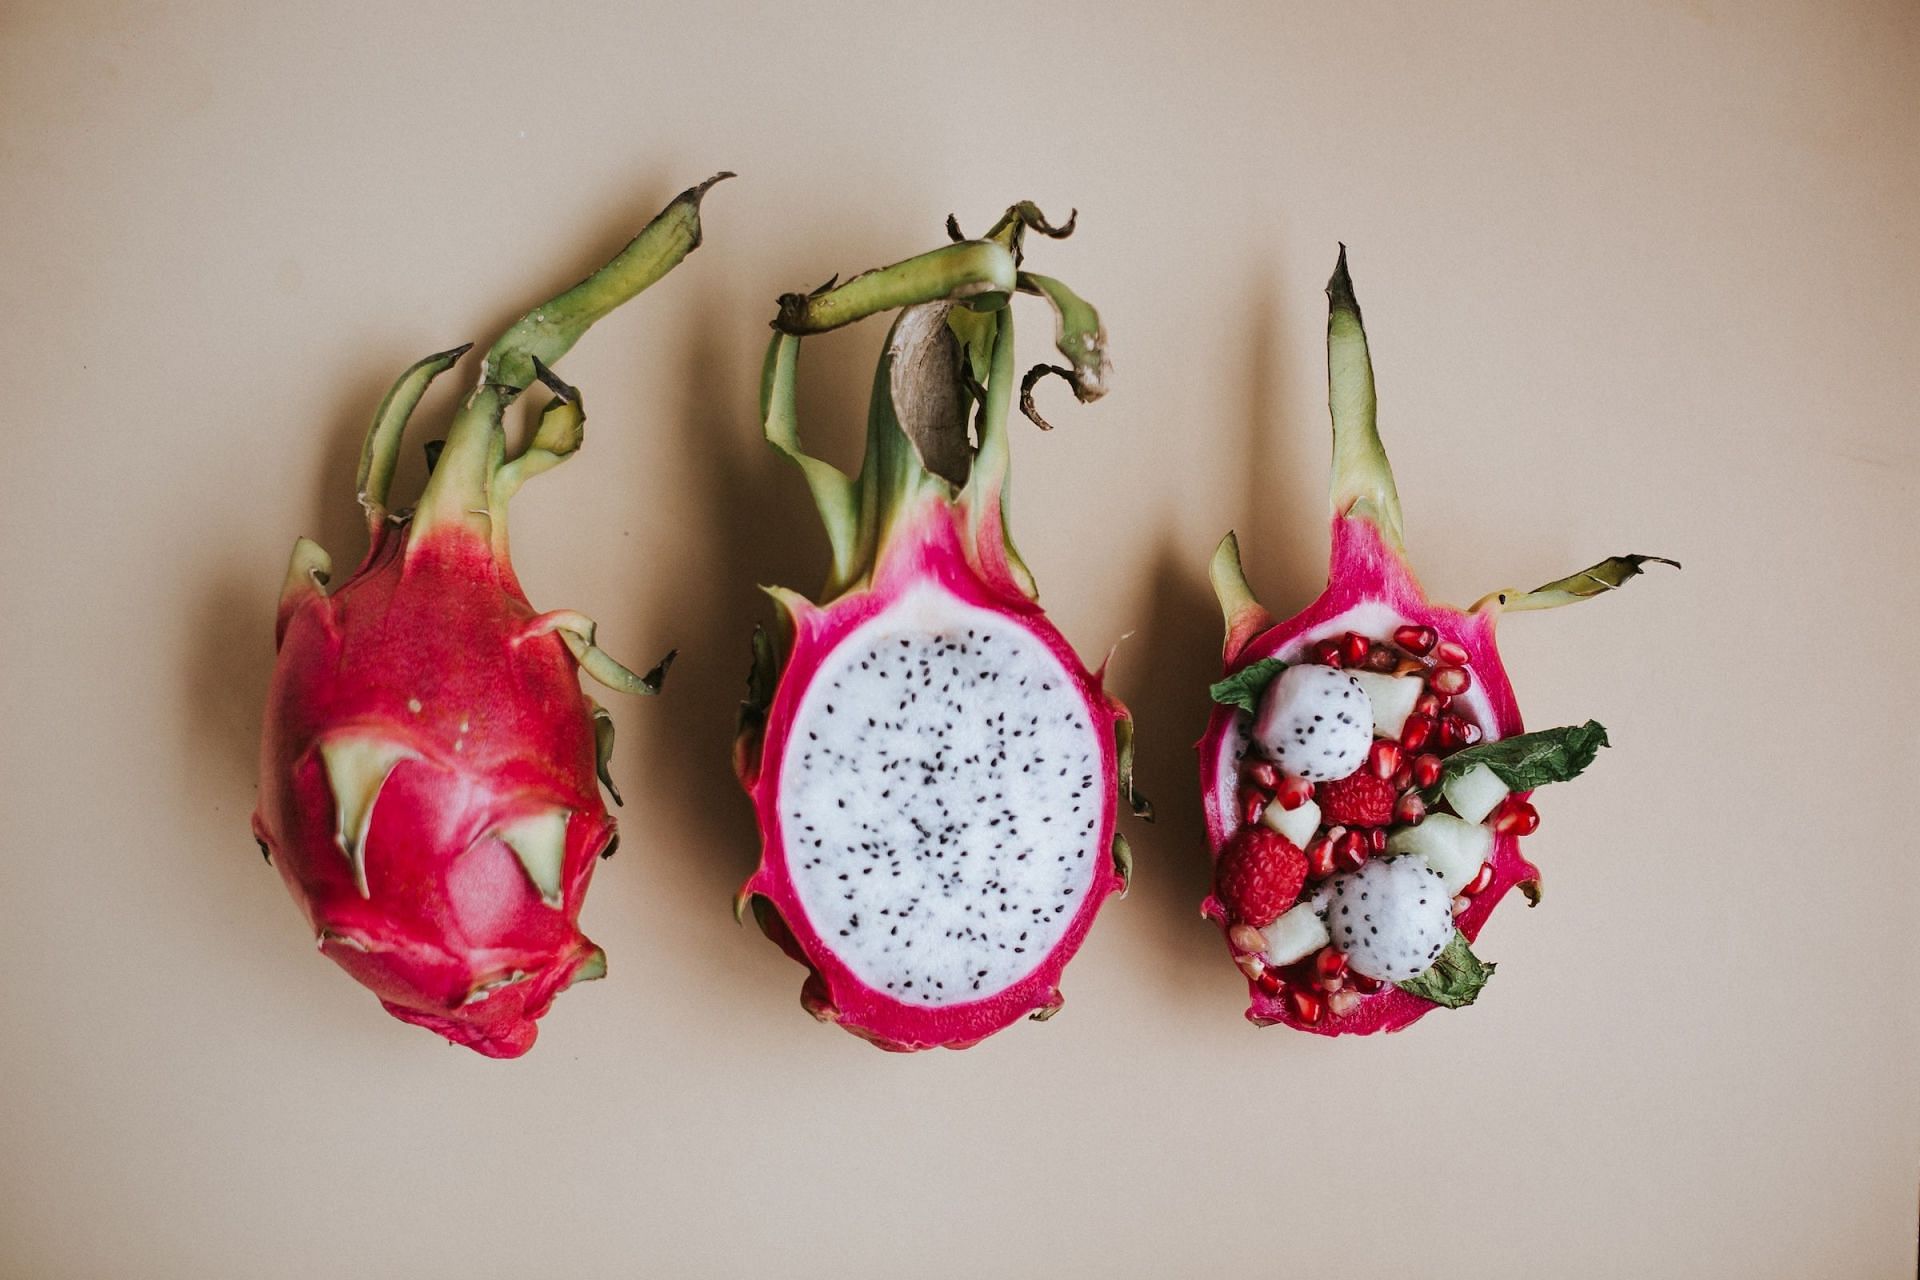 Dragon Fruit is known for its numerous health benefits (Image via Unsplash/Heather Ford)